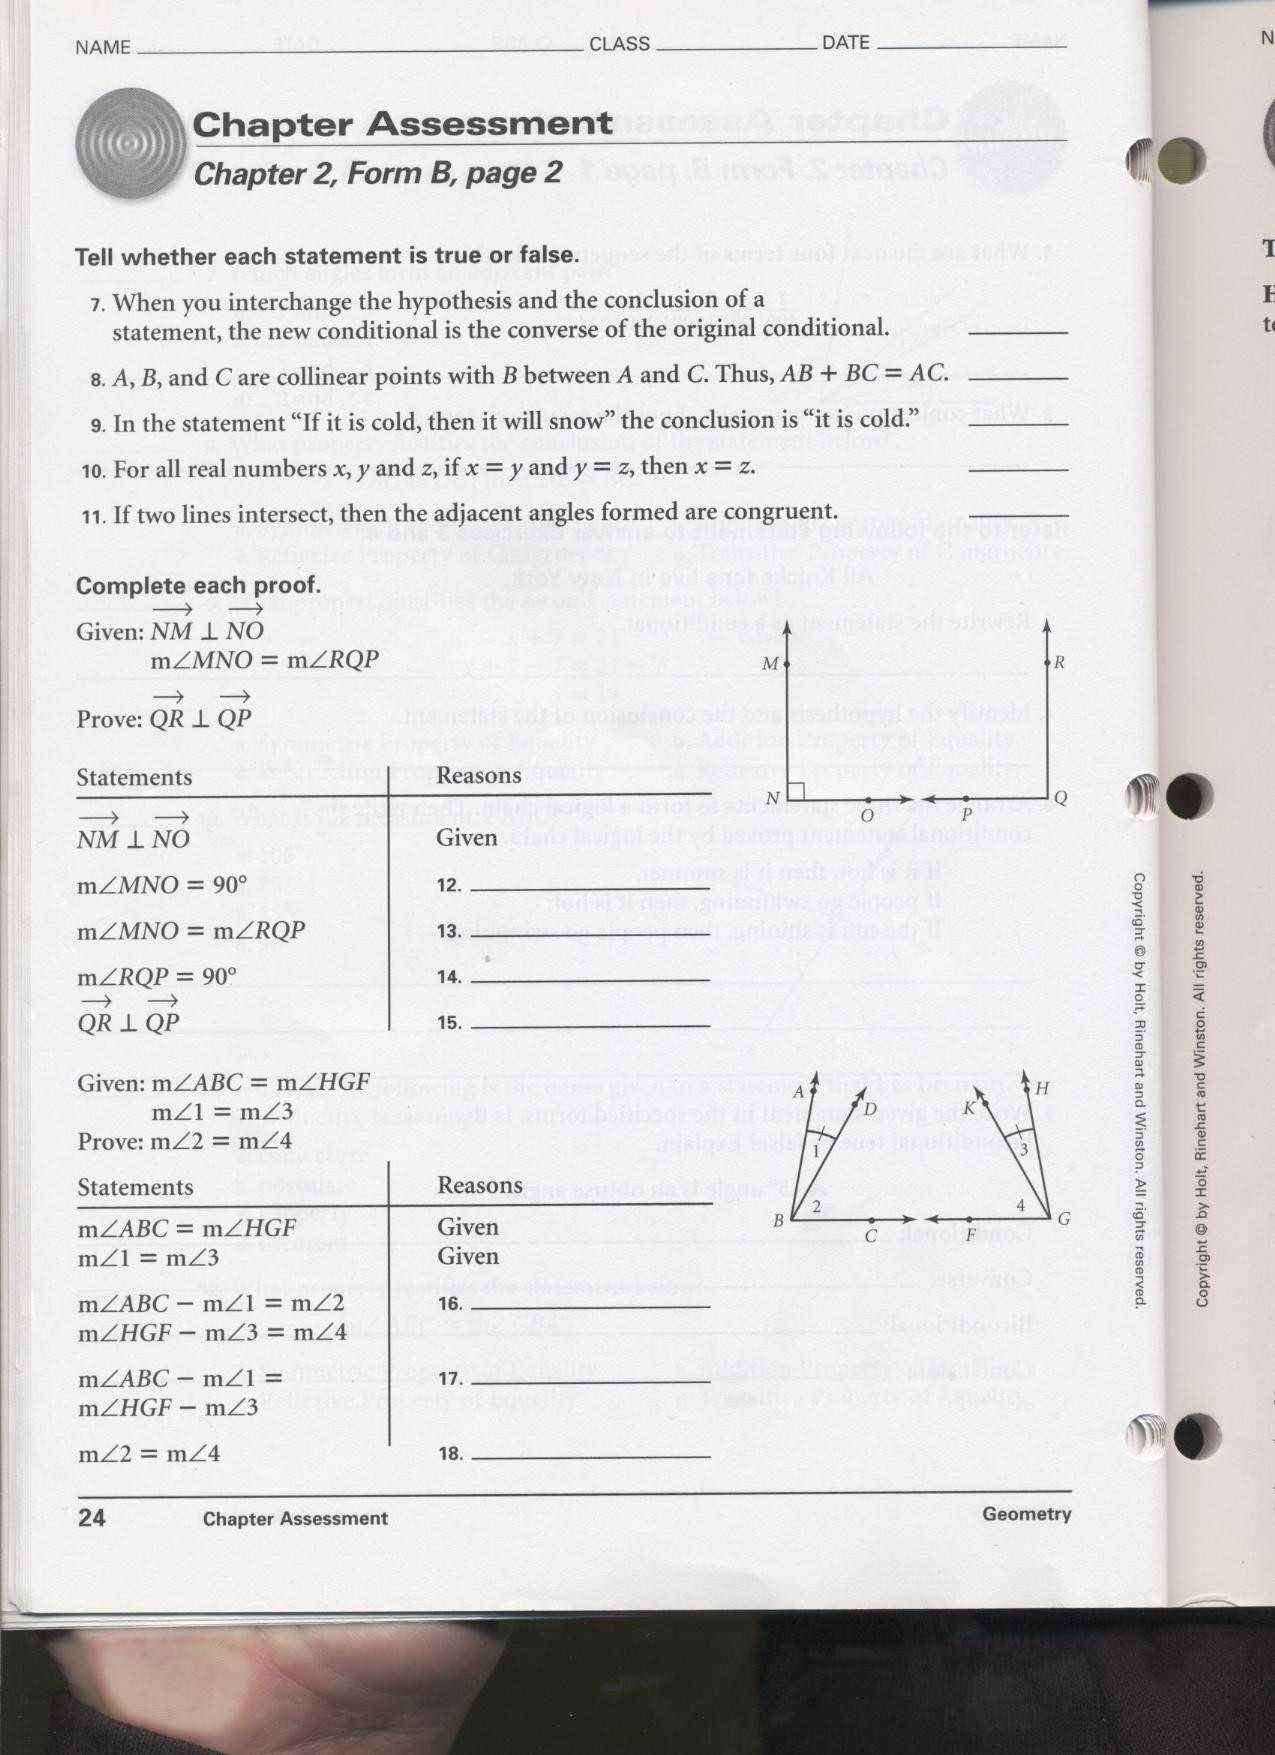 Glencoe Geometry Chapter 4 Worksheet Answers with Holt Mathematics Worksheets with Answers Inspirational Pythagorean